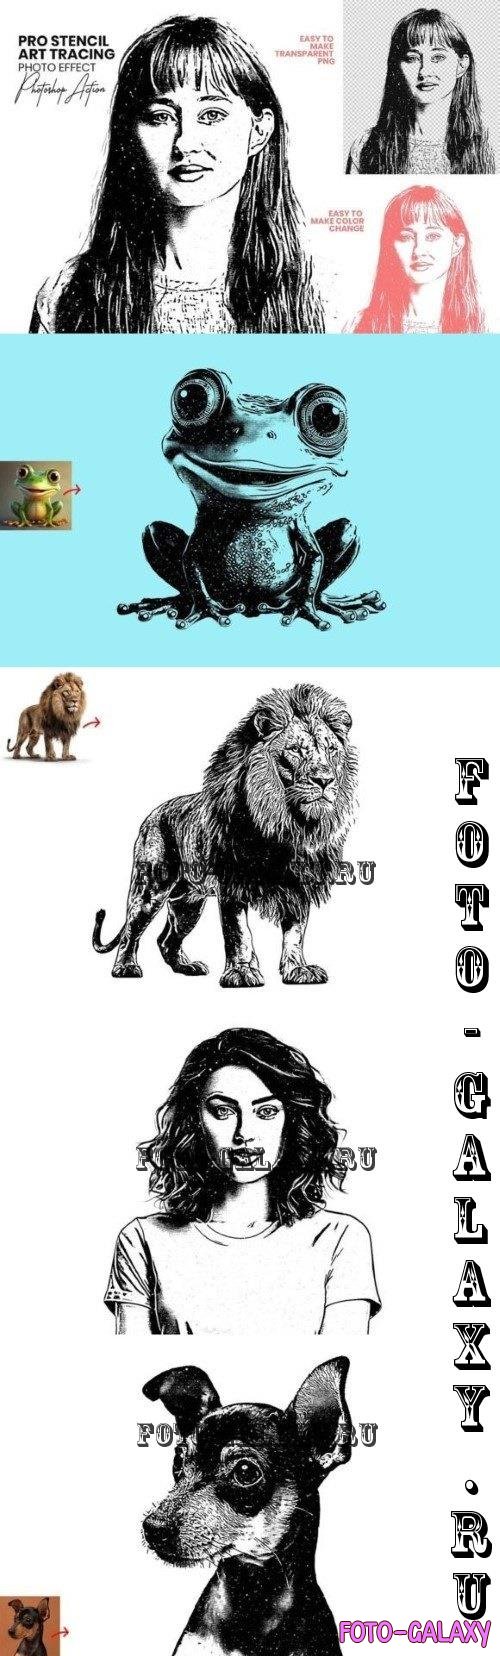 Pro Stencil Art Tracing Action - 91884259